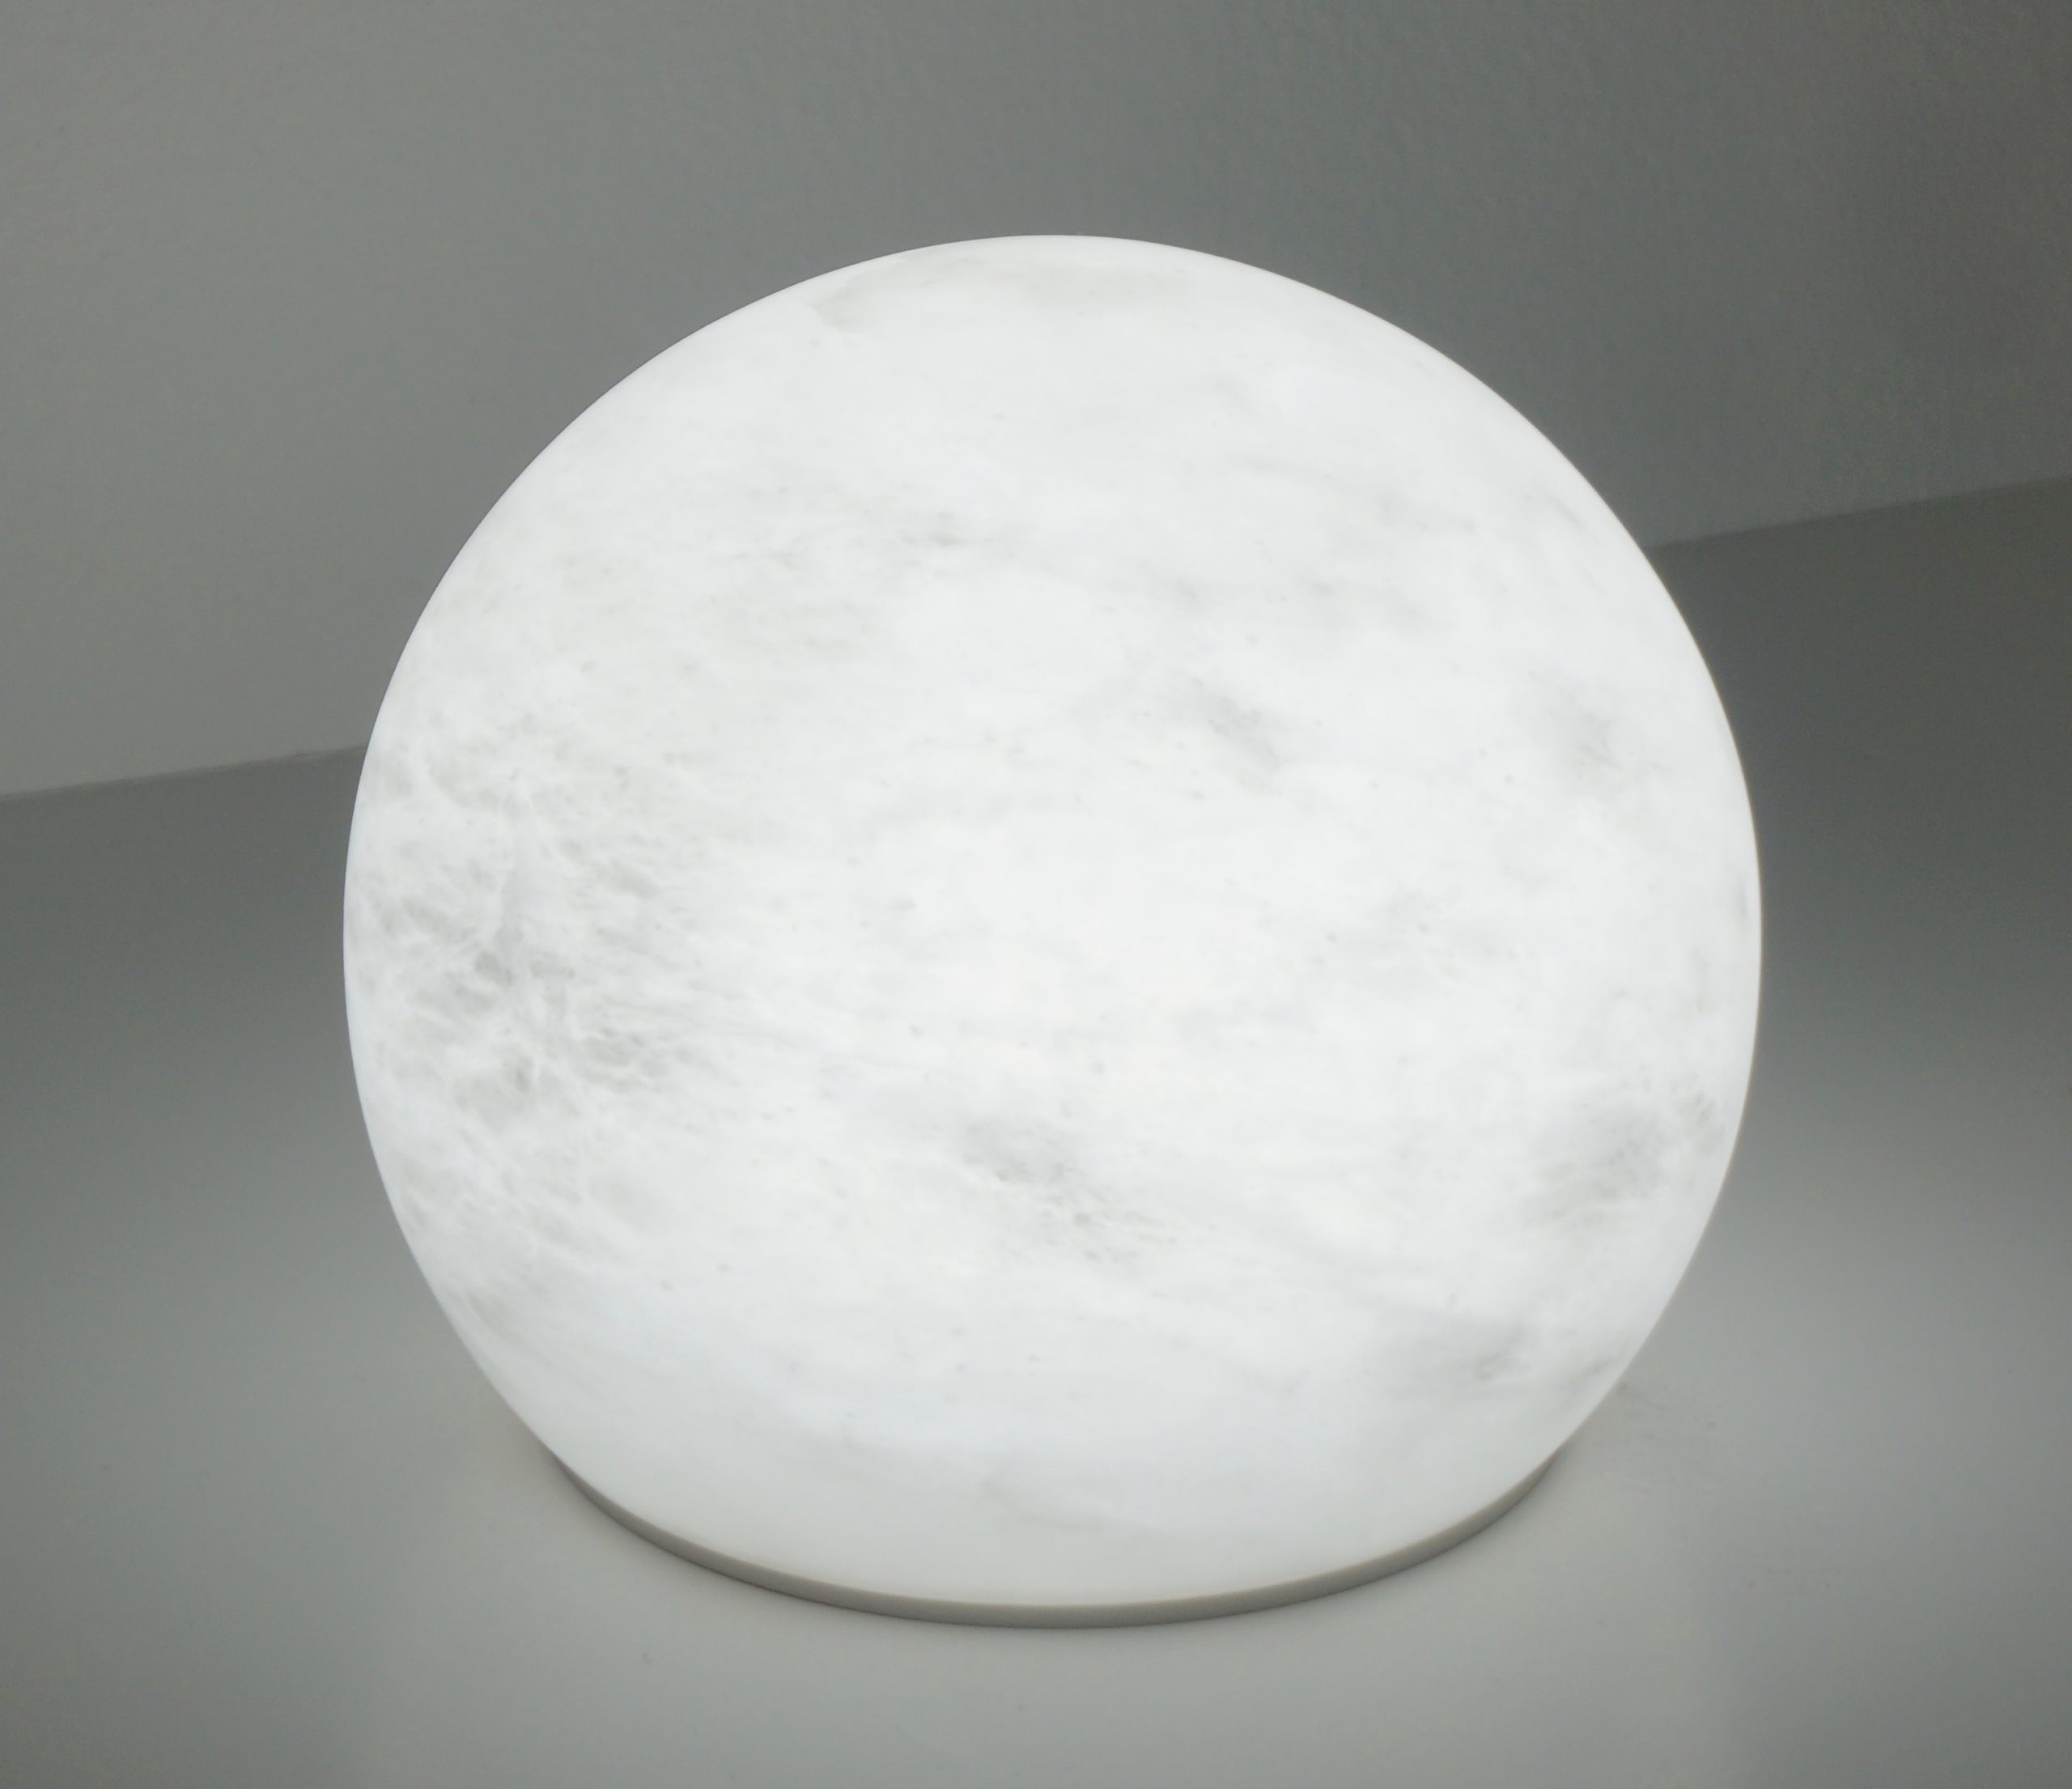 cosulich_interiors_and_antiques_products_new_york_design_Bespoke_Italian_Minimalist_White_Alabaster_Moon_Wireless_Round_Table_2-scaled-1